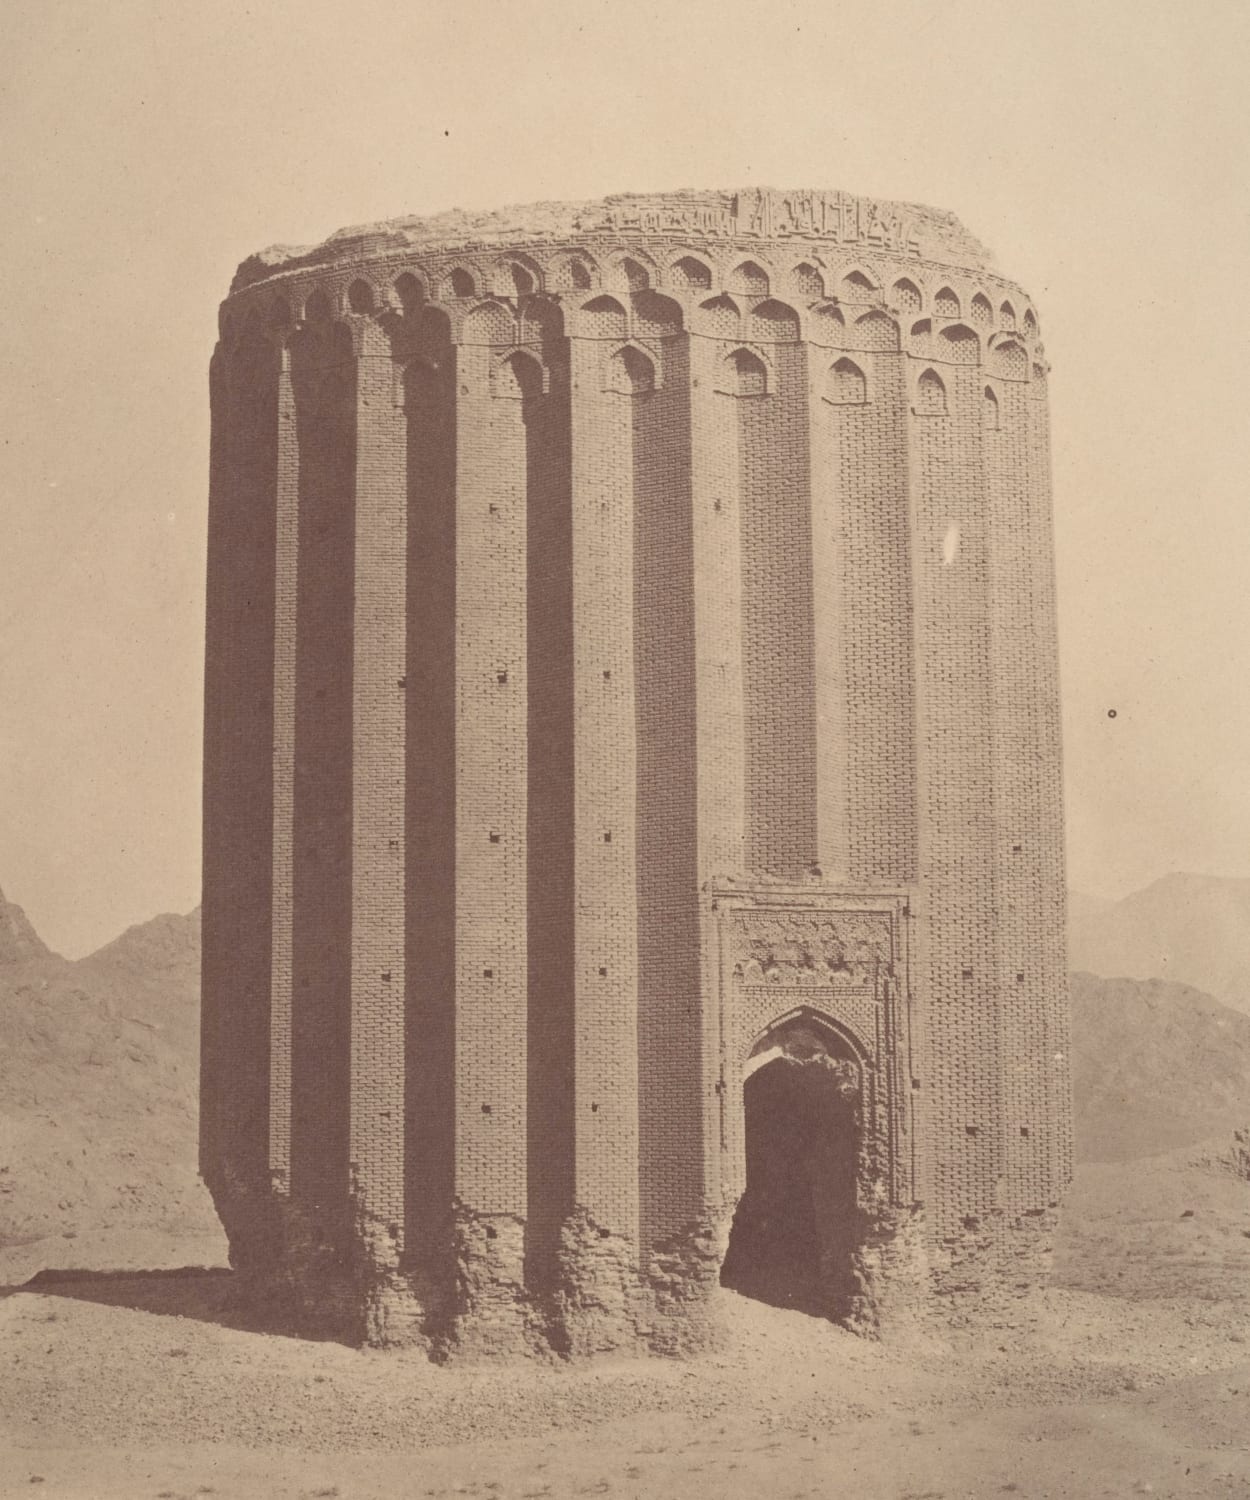 Toghrol Tower, as it was photographed in the 1840s. Iran, Seljuk period, 1063